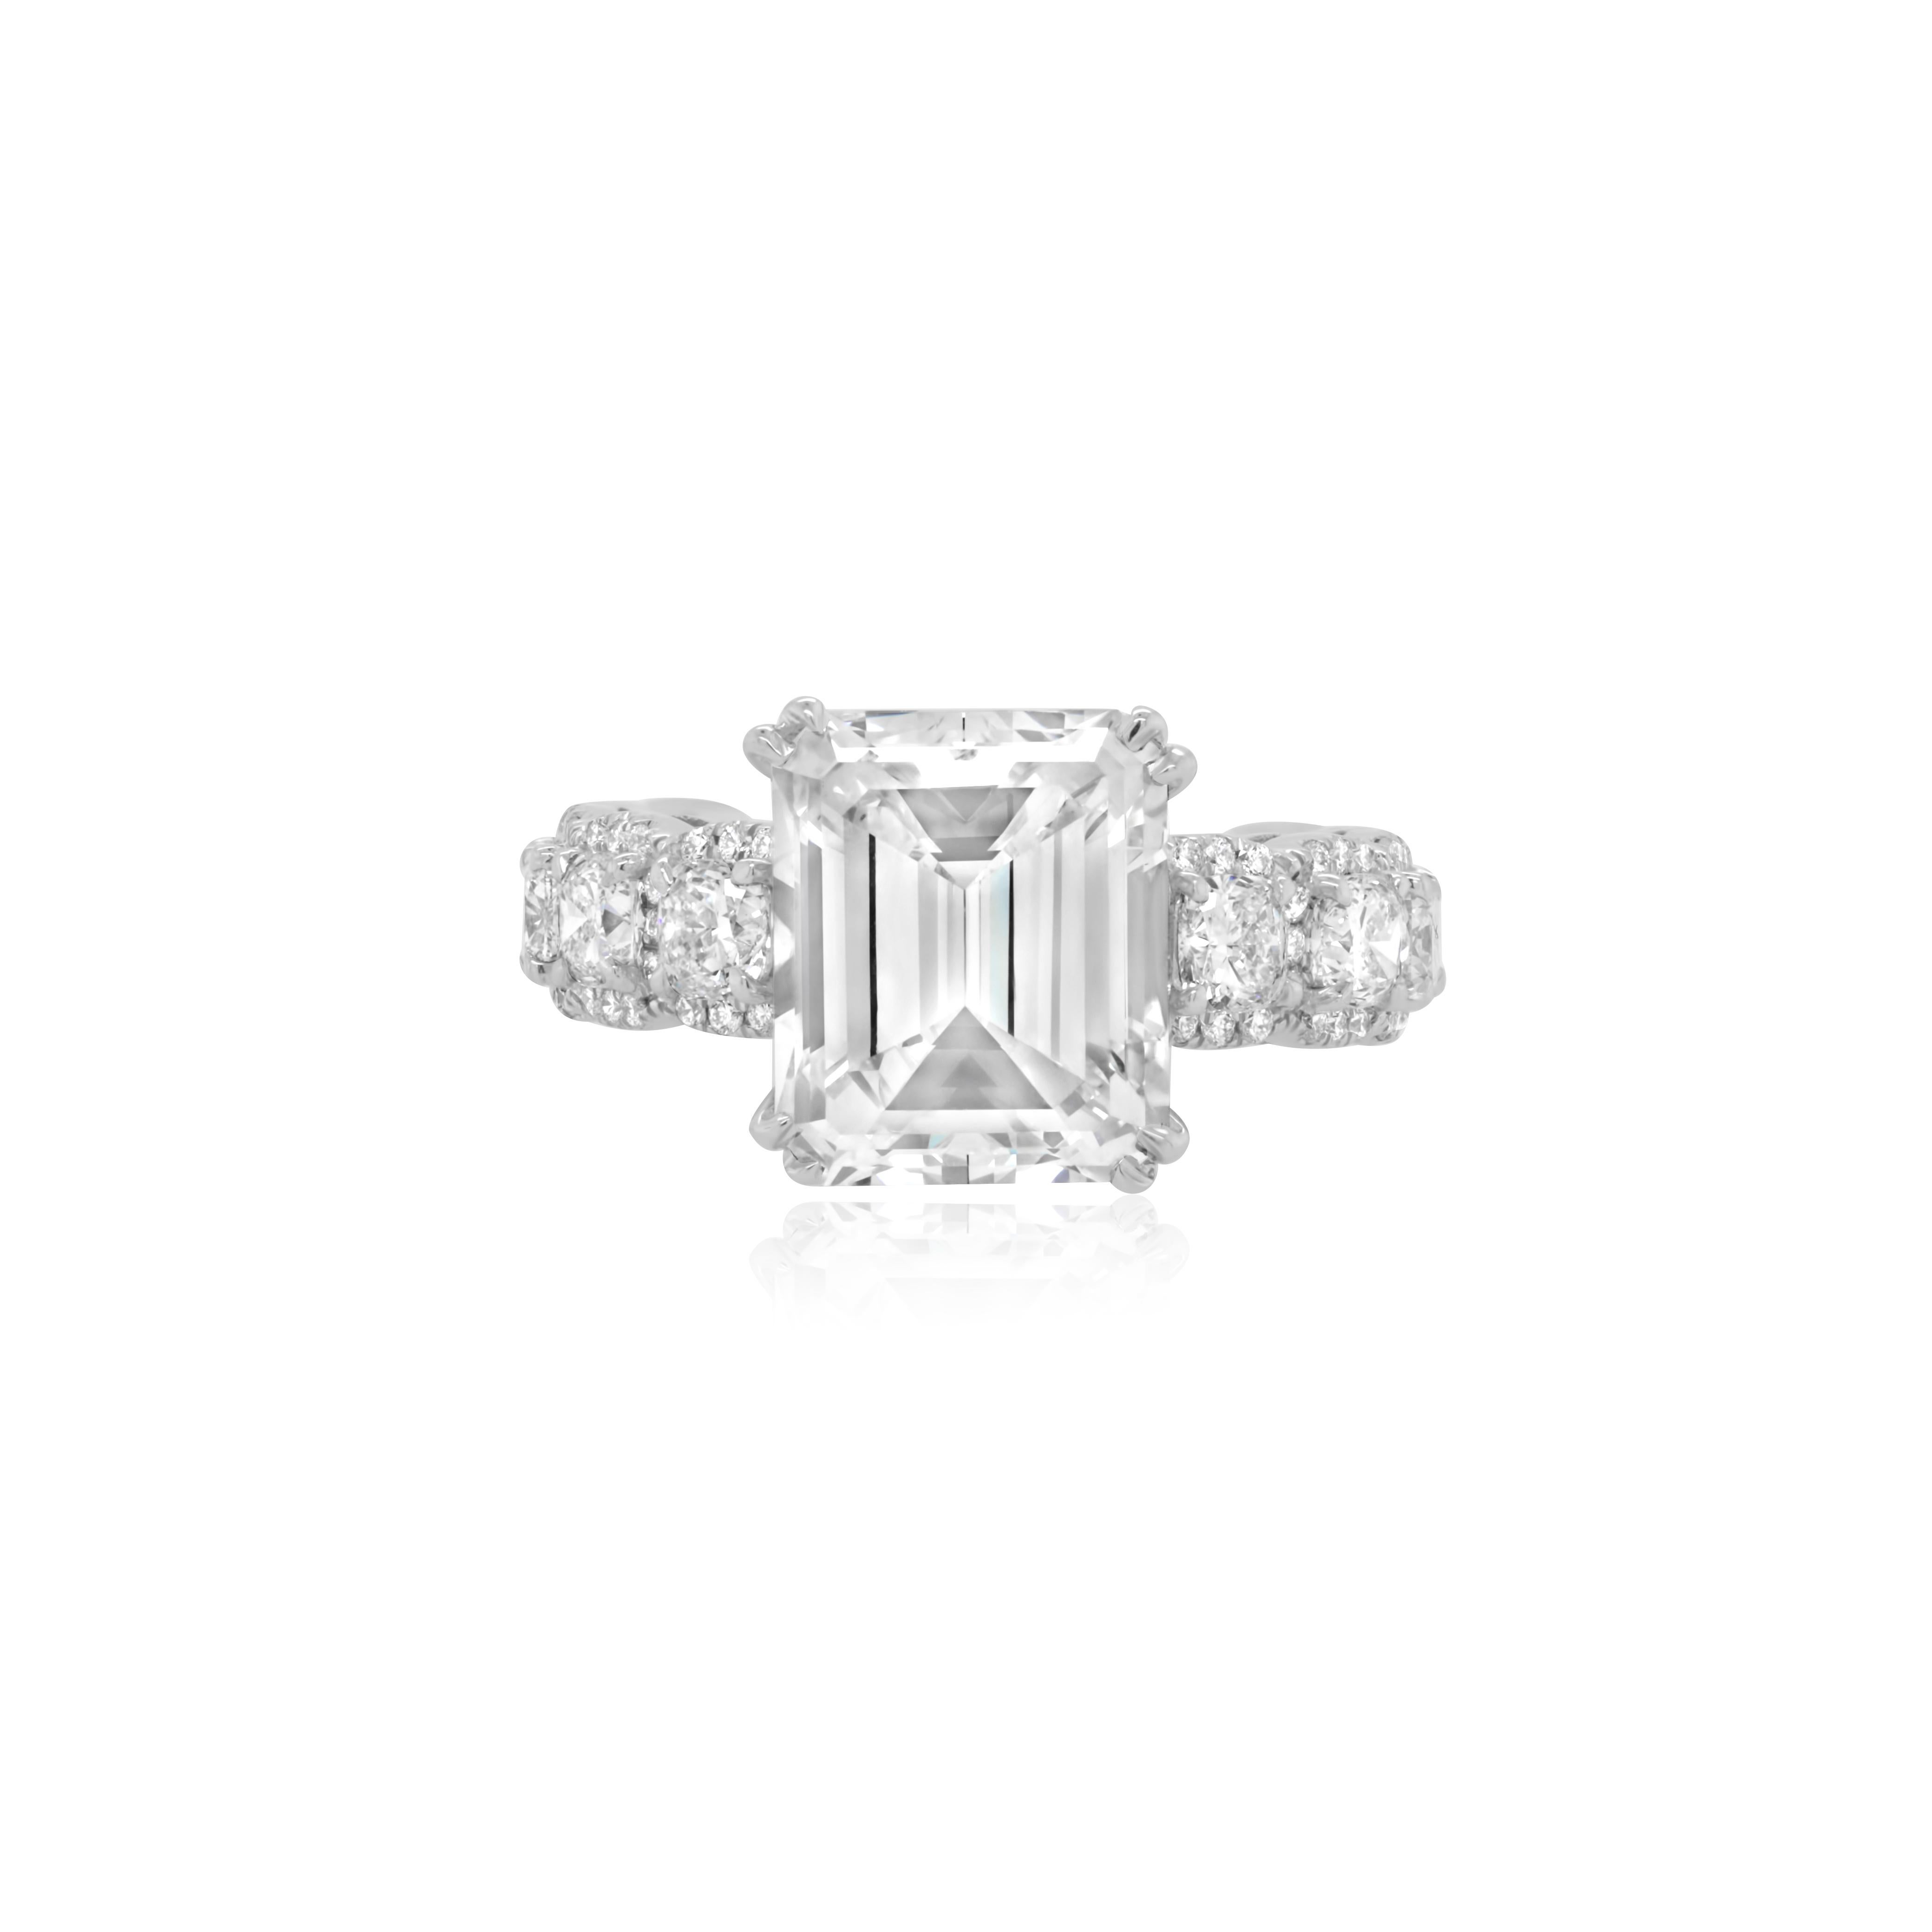 Crafted in luxurious platinum, this enchanting engagement ring showcases a magnificent 5.04 carat emerald cut diamond at its center, graded as J color and SI1 clarity. The mesmerizing diamond is securely set within a sleek and sophisticated mounting